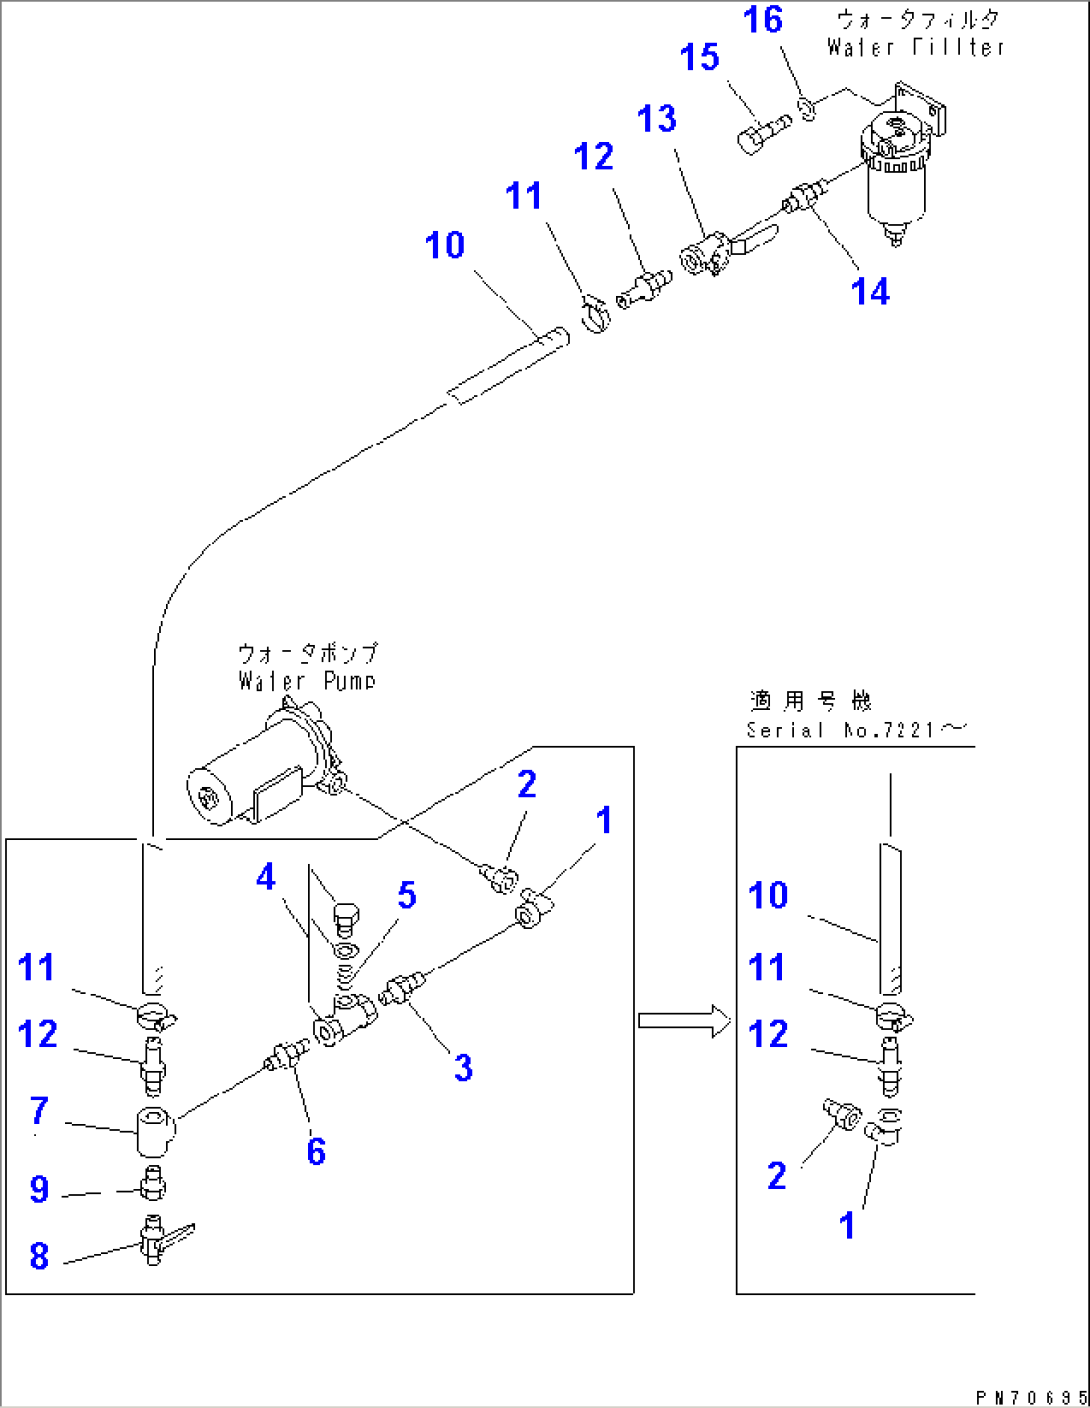 WATER PIPING (2/5) (DELIVERY LINE)